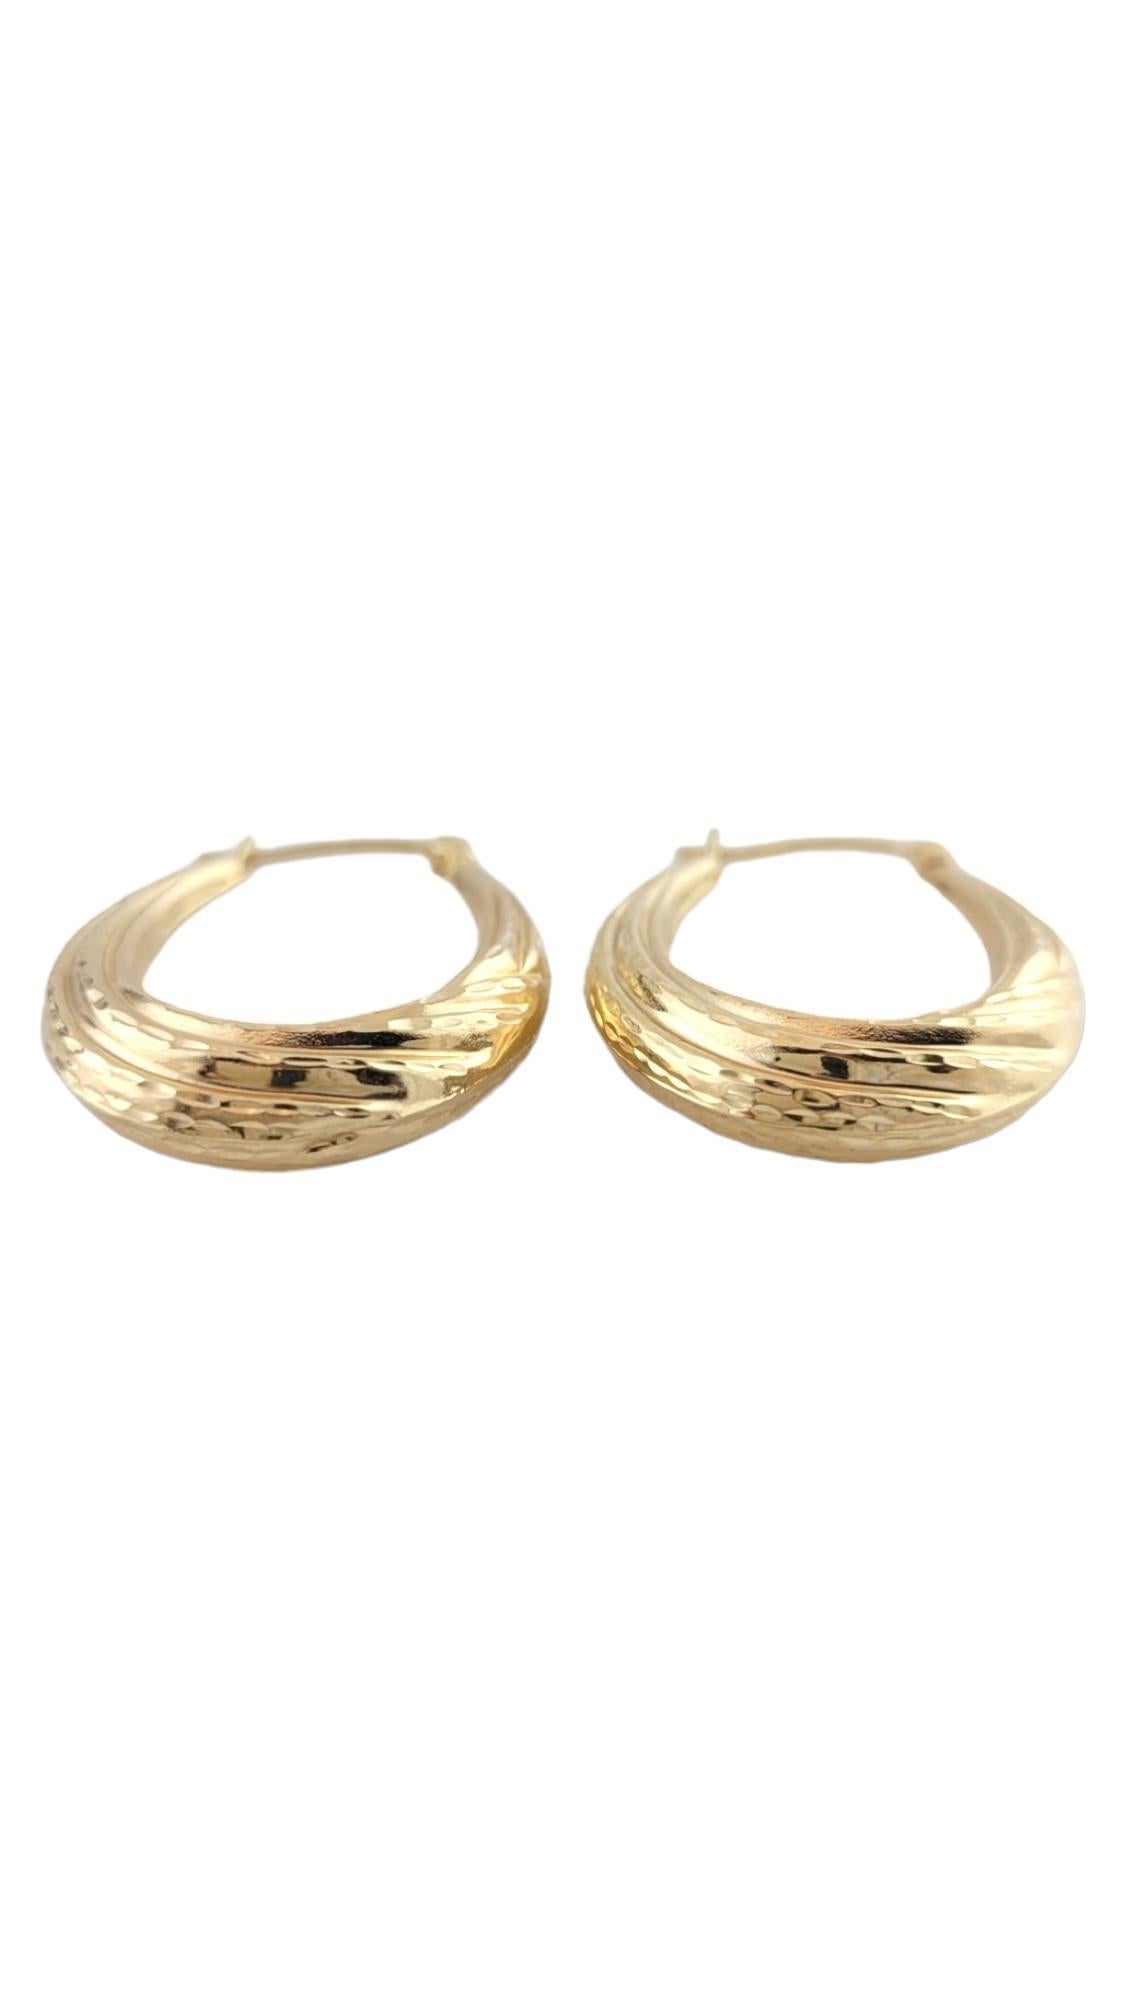 14K Yellow Gold Textured Oval Hoop Earrings #16188 In Good Condition For Sale In Washington Depot, CT